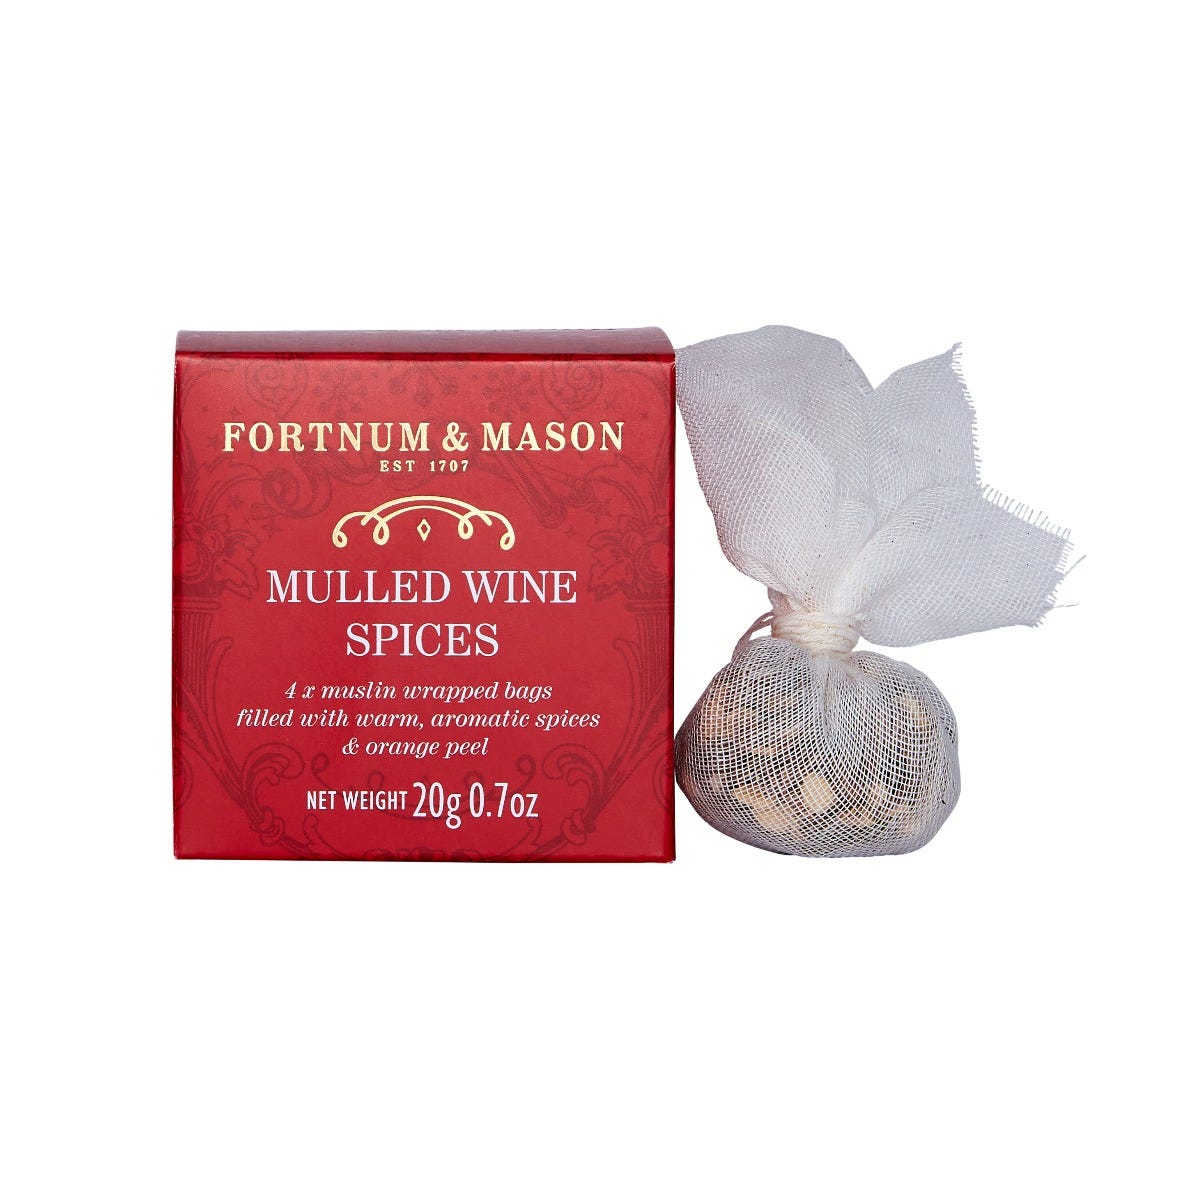 Mulled Wine Spices, 20g, Fortnum & Mason